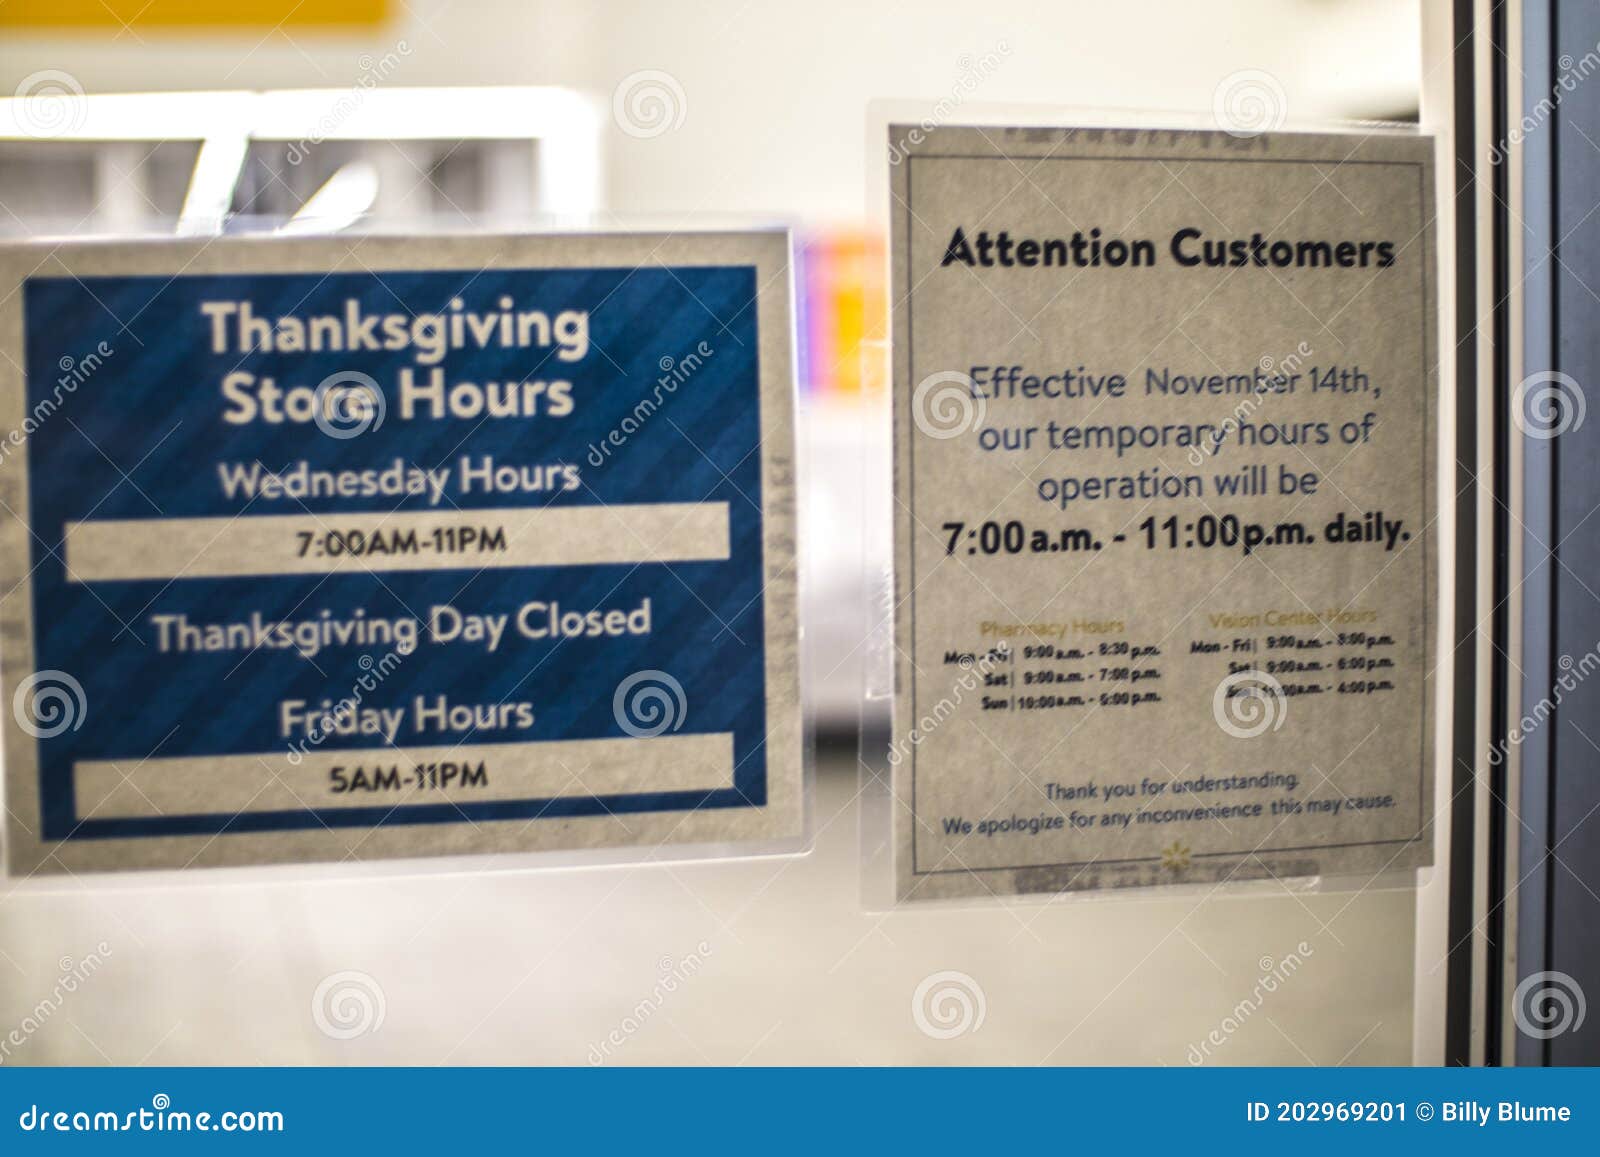 Walmart Thanksgiving Stores Hours Sign in a Window Editorial Photo